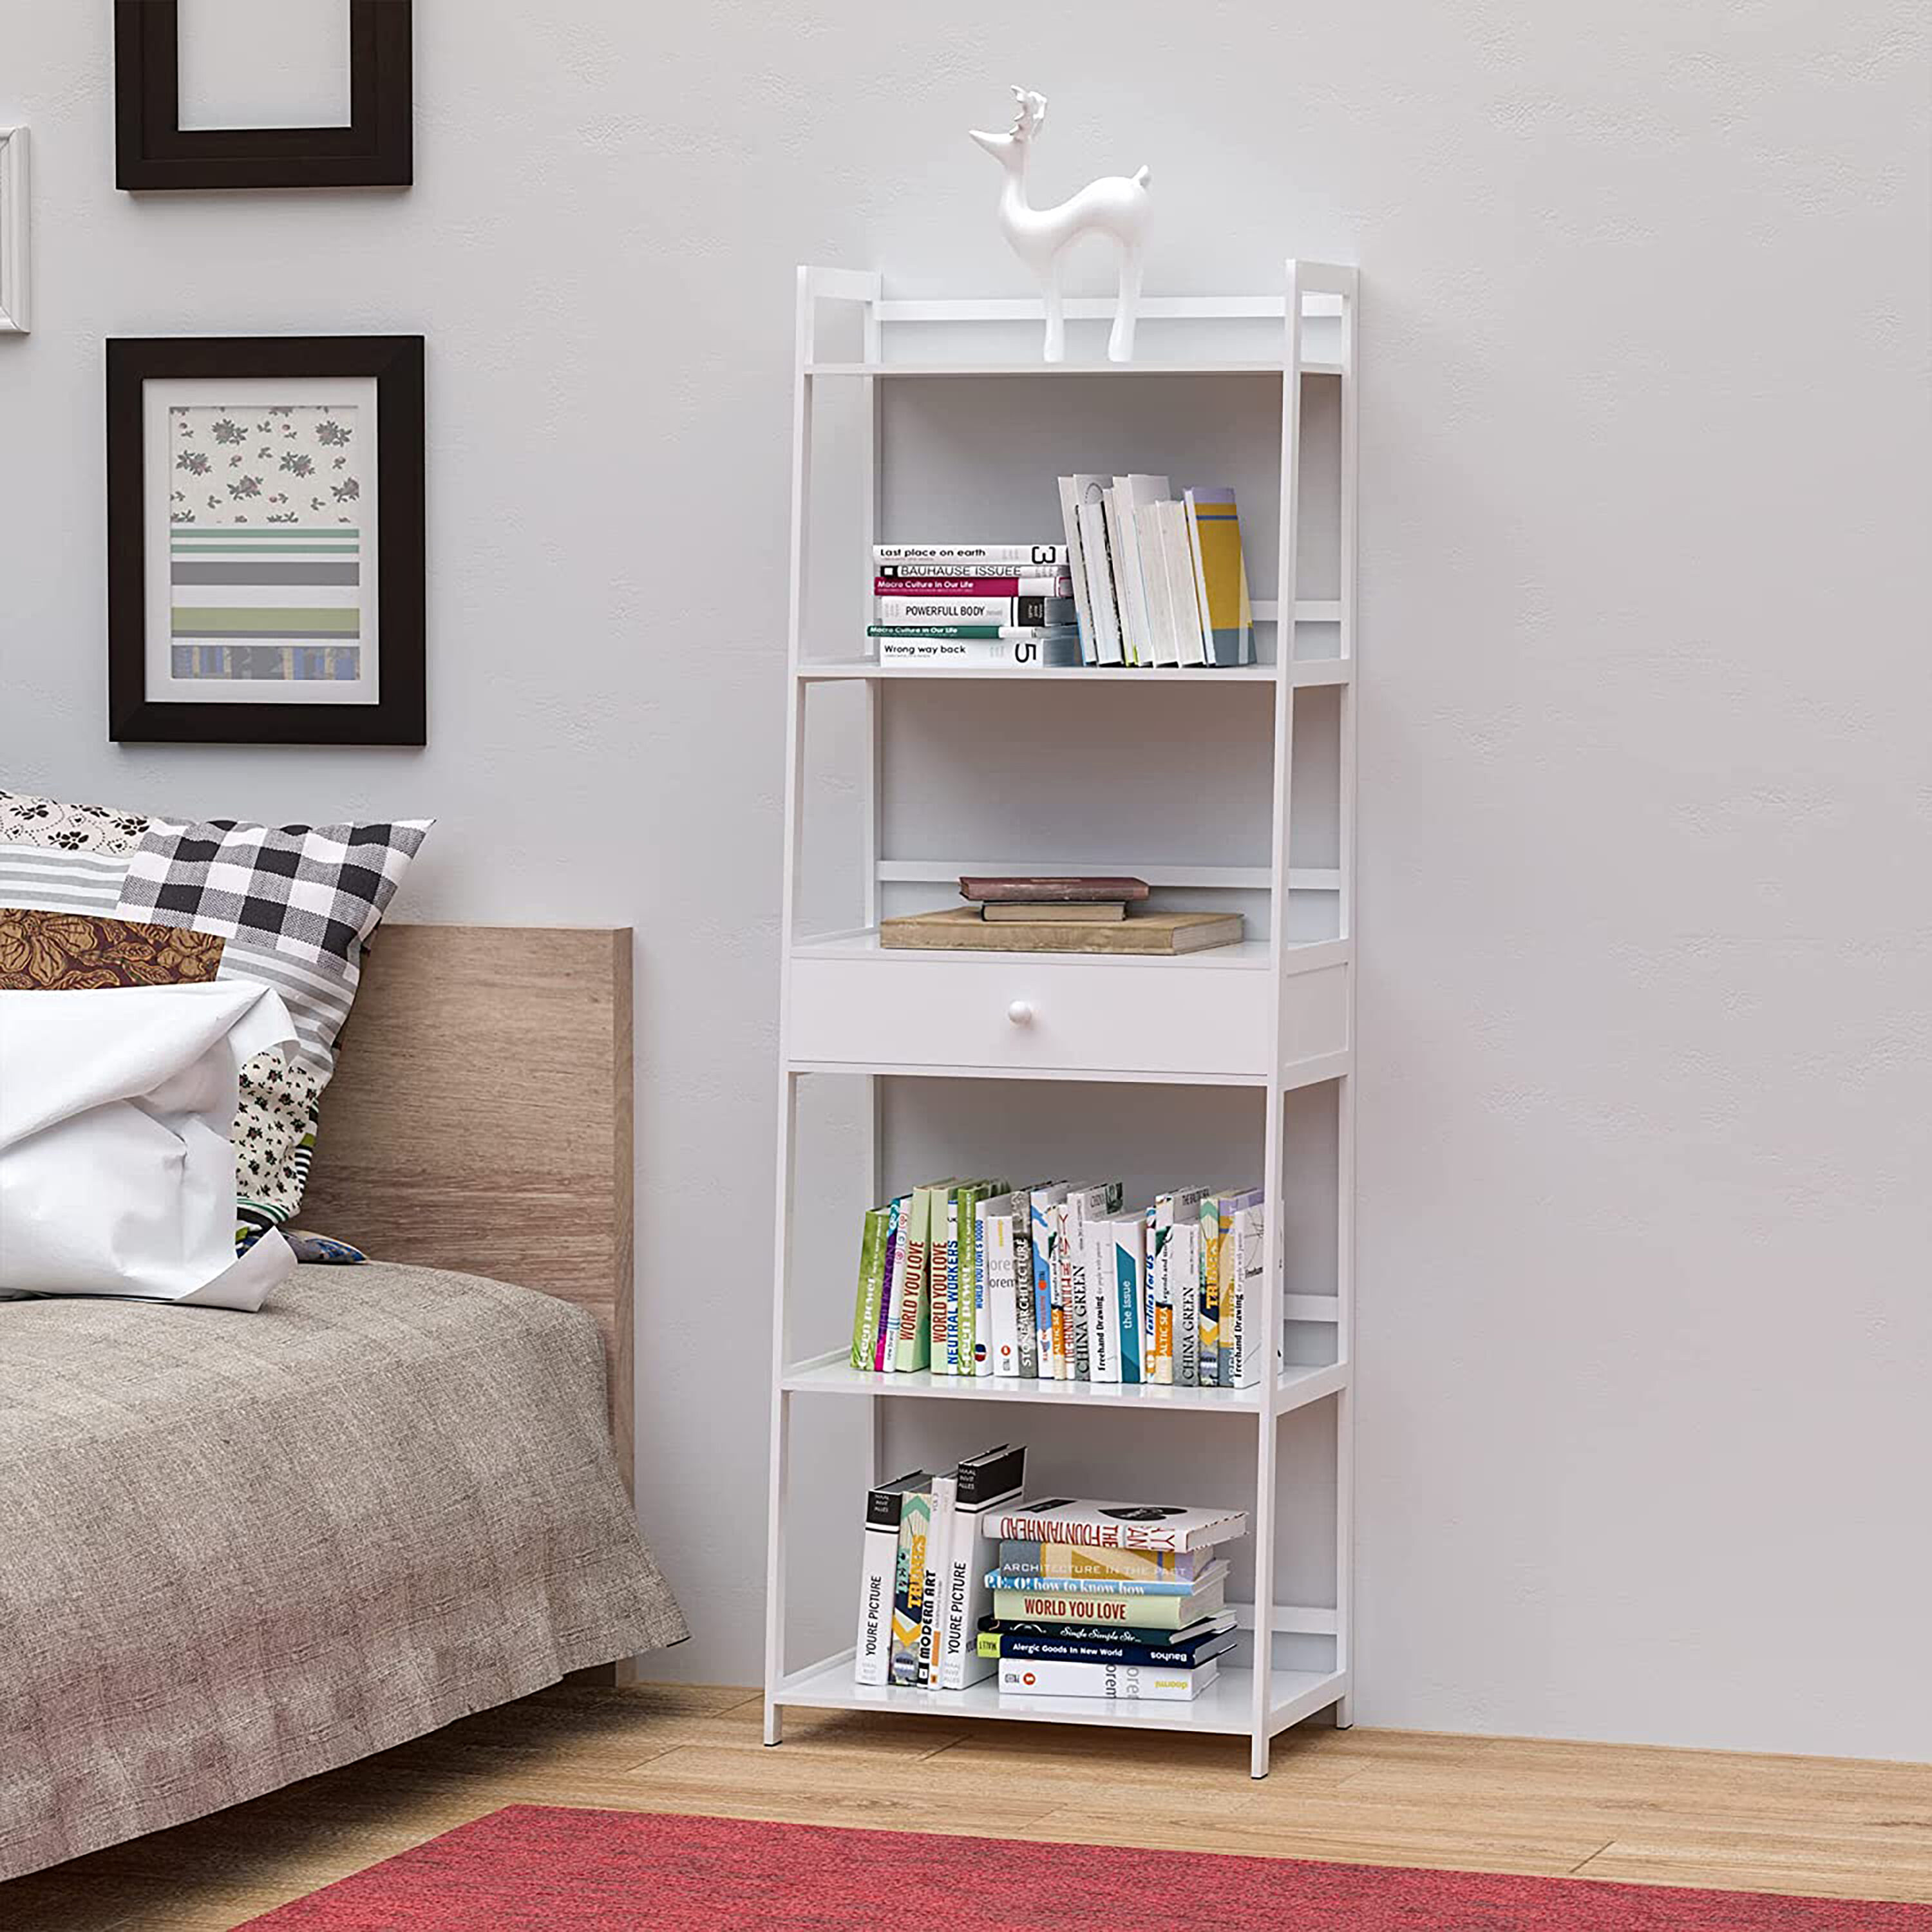 Wrightmaster Bookshelf, Ladder Shelf with Drawers, 5 Tier Tall Bookcase,  Modern Open Book Case for Bedroom, Living Room, Office, Natural in the  Freestanding Shelving Units department at